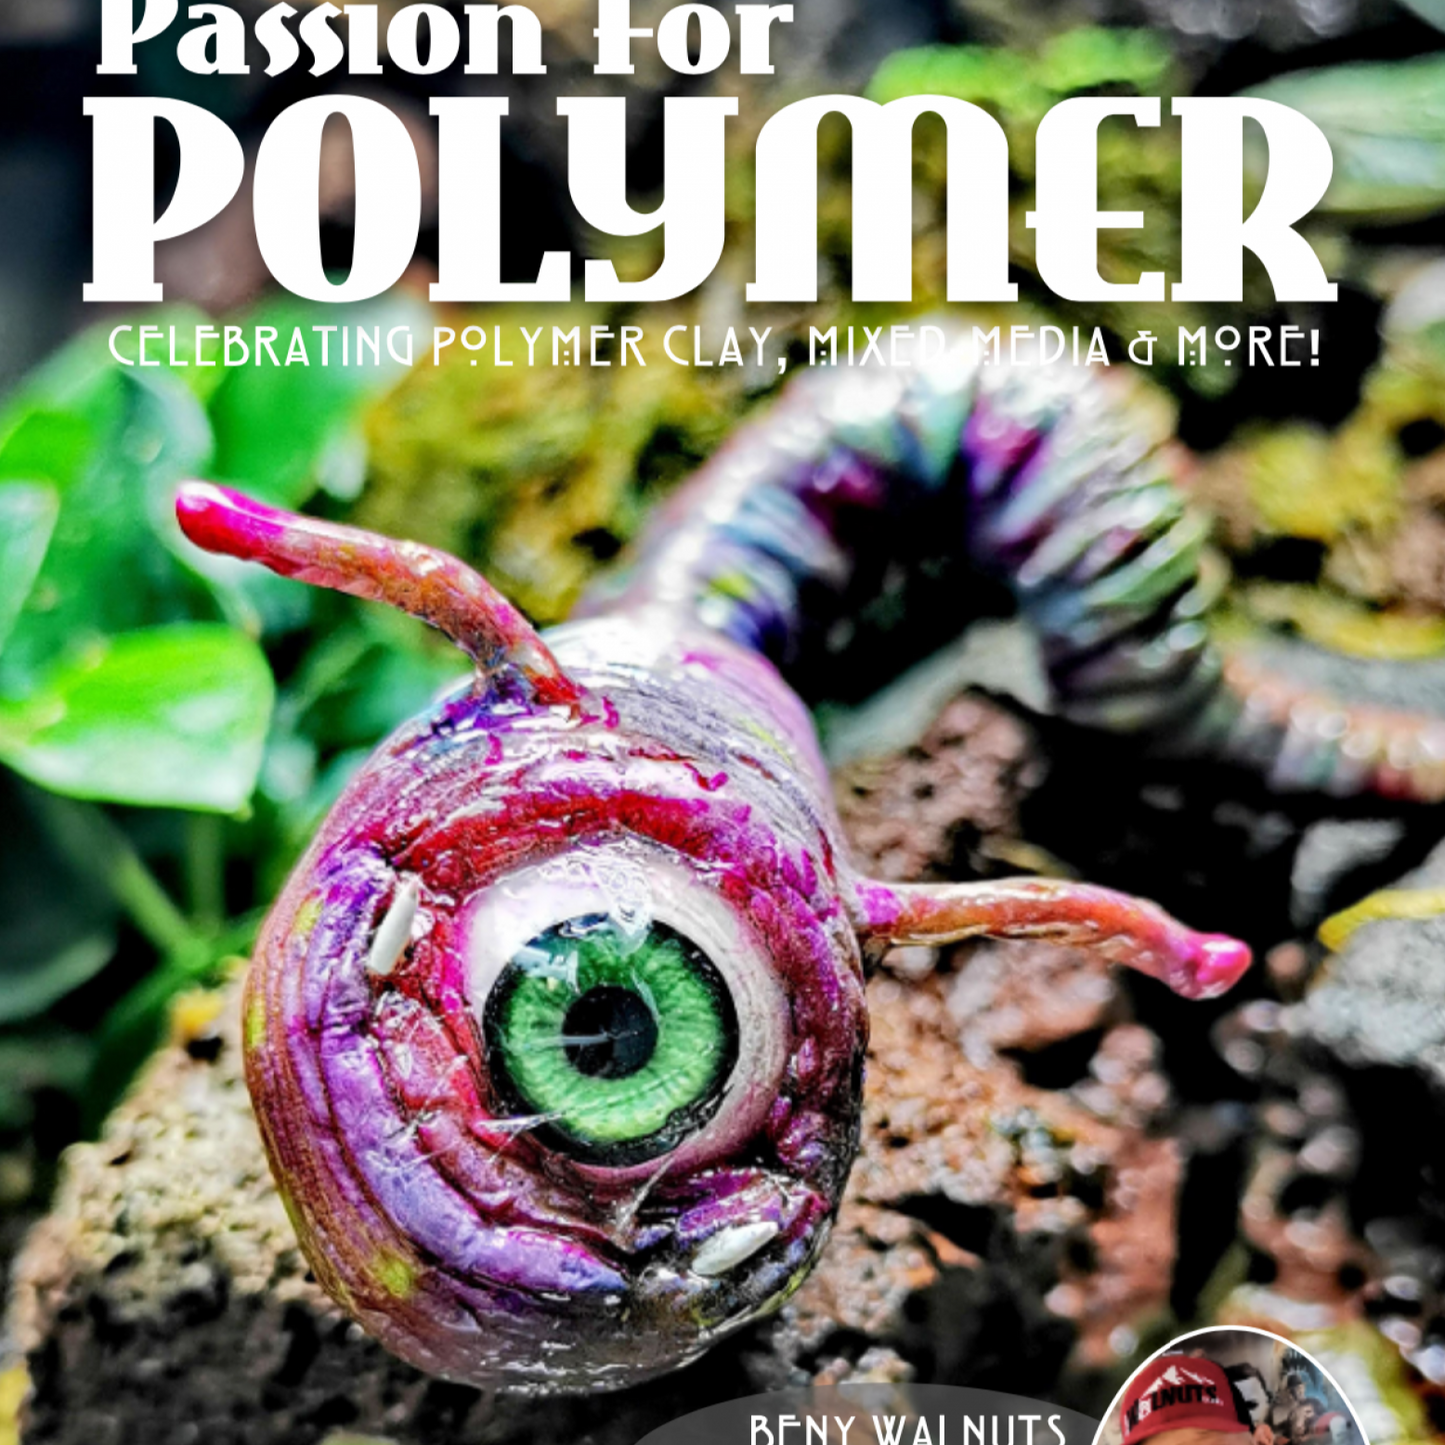 Fantasy Passion for Polymer Clay Magazine Project Book DIGITAL October 2020 Tutorials